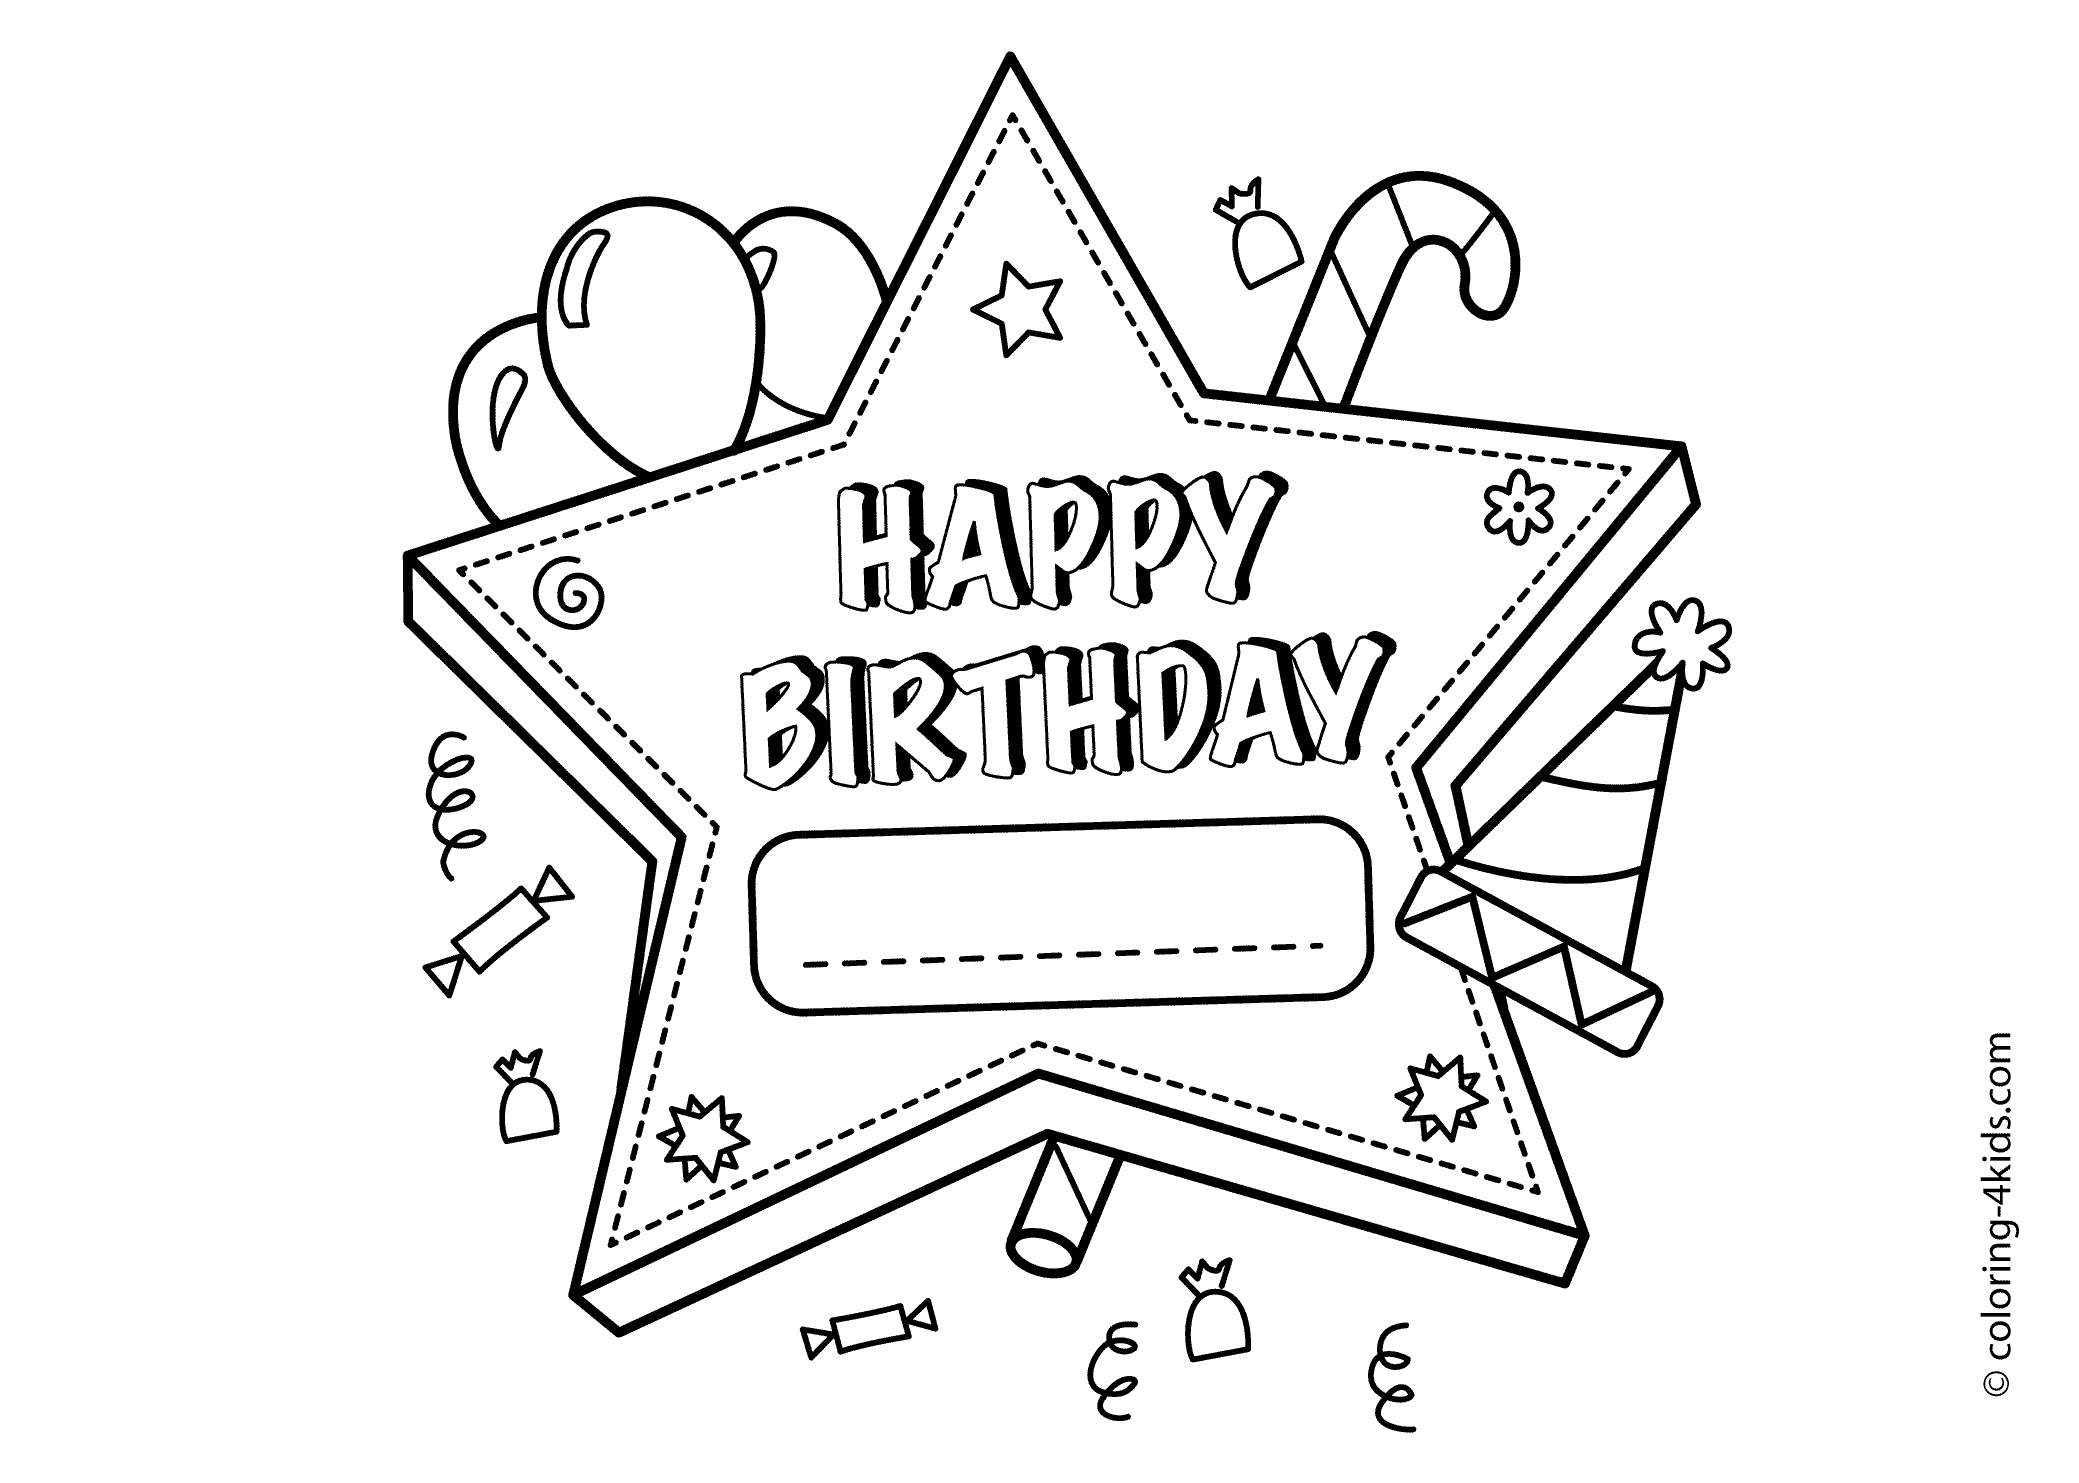 Happy Birthday Coloring Pages For Friends Images Of Happy Birthday Coloring Sheets Sabadaphnecottage